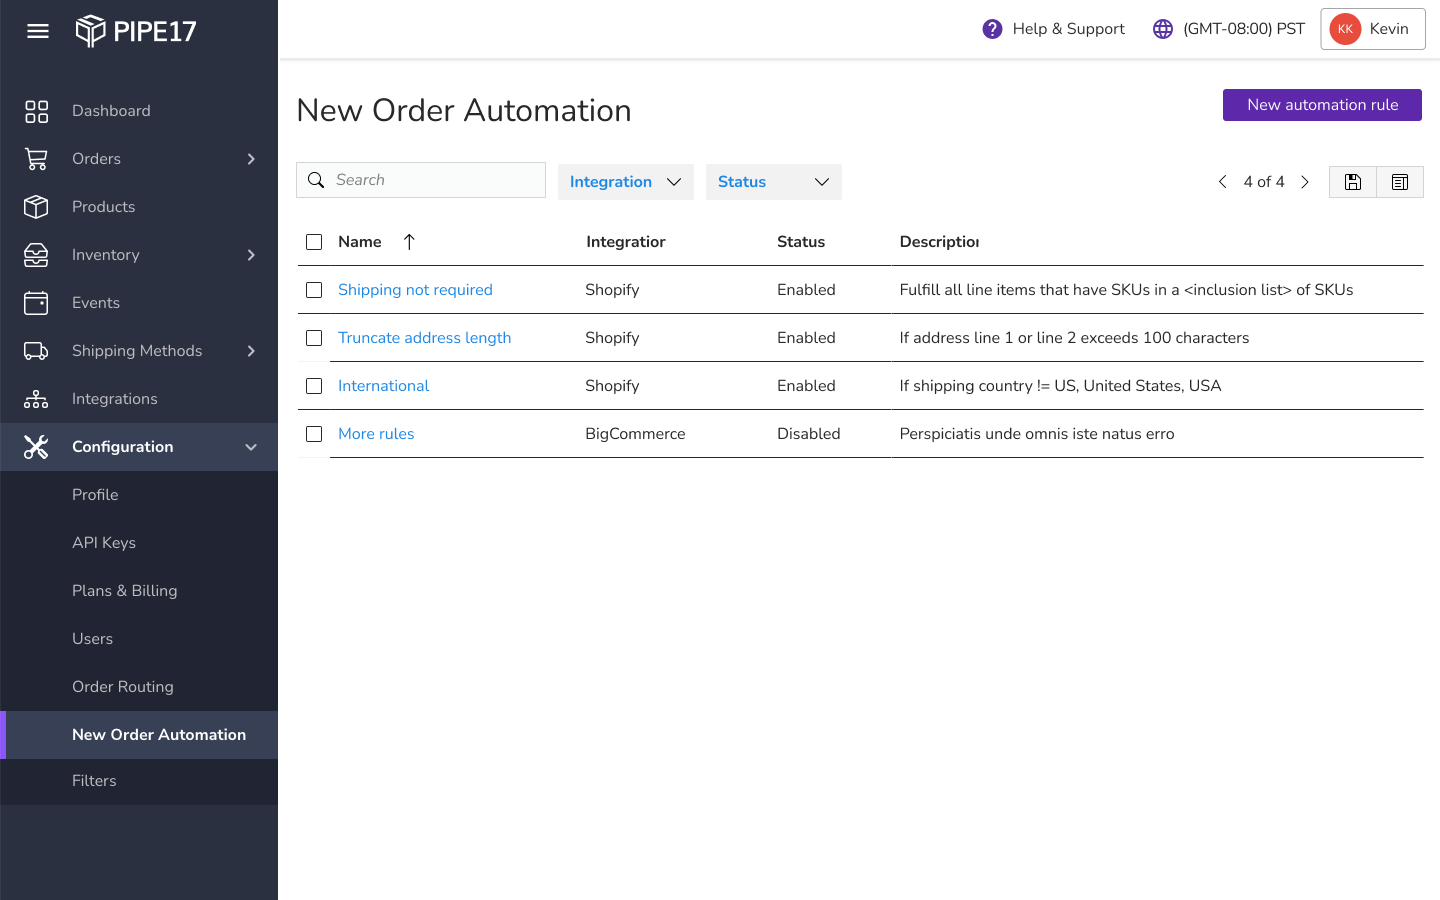 Order Automation between endpoints